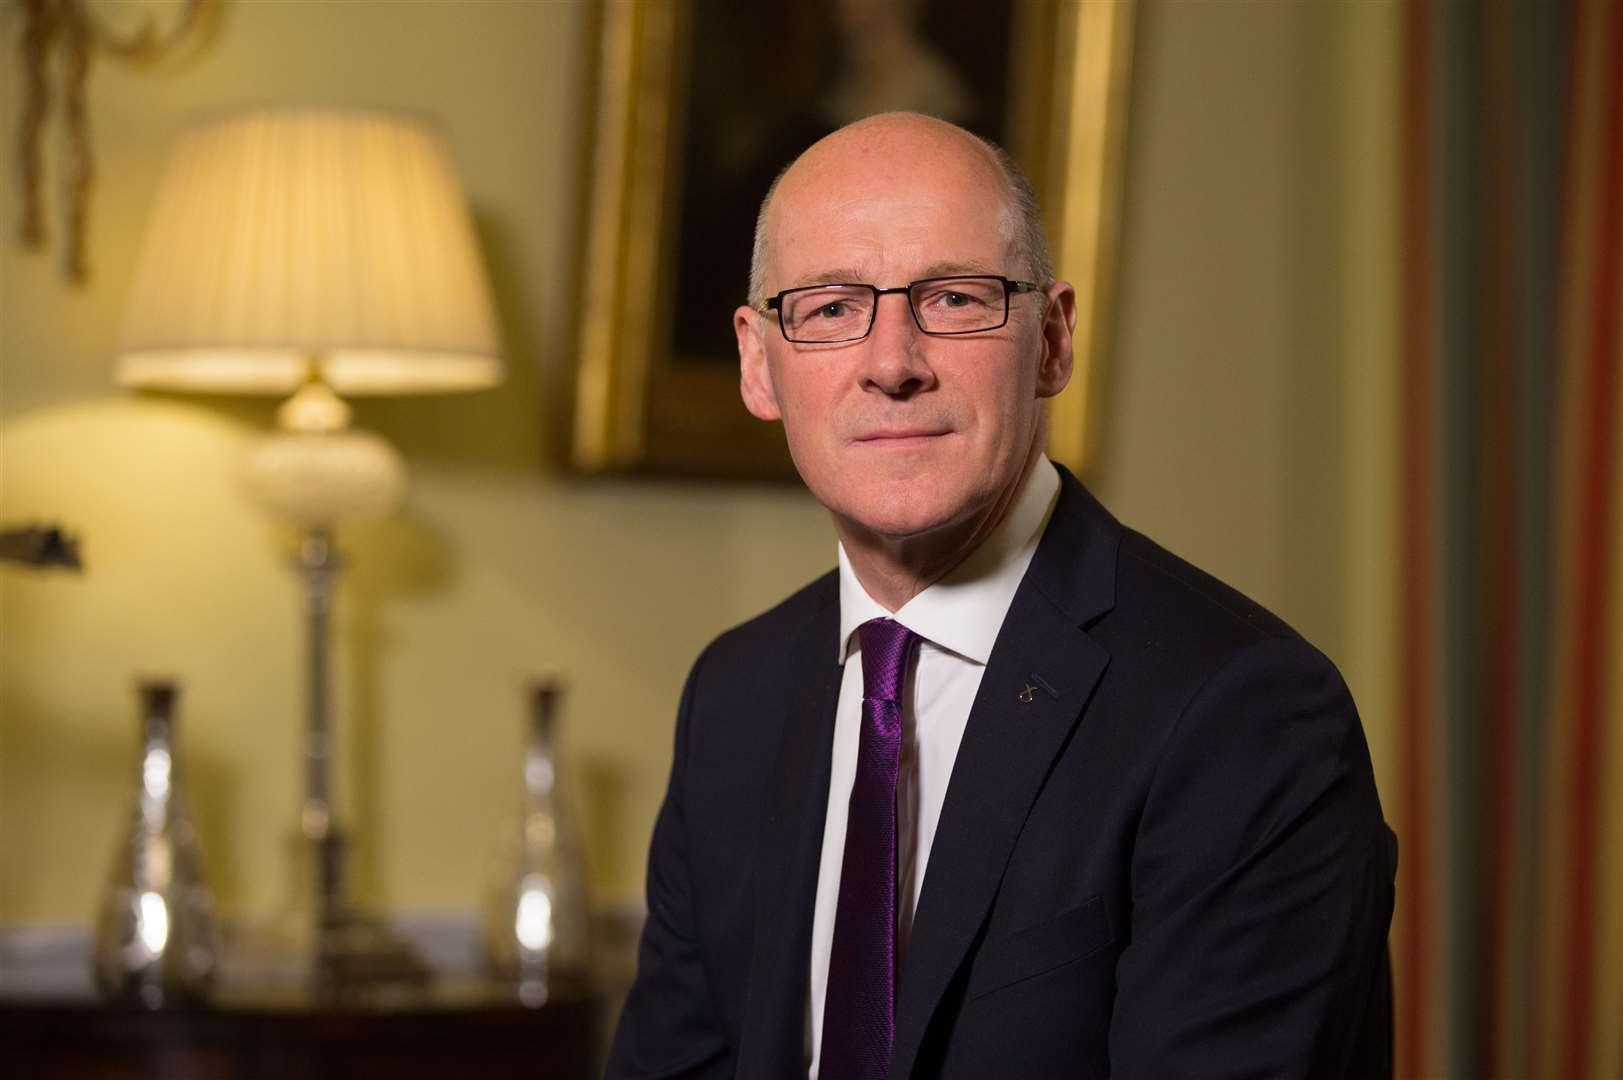 John Swinney announced the change at Holyrood today.